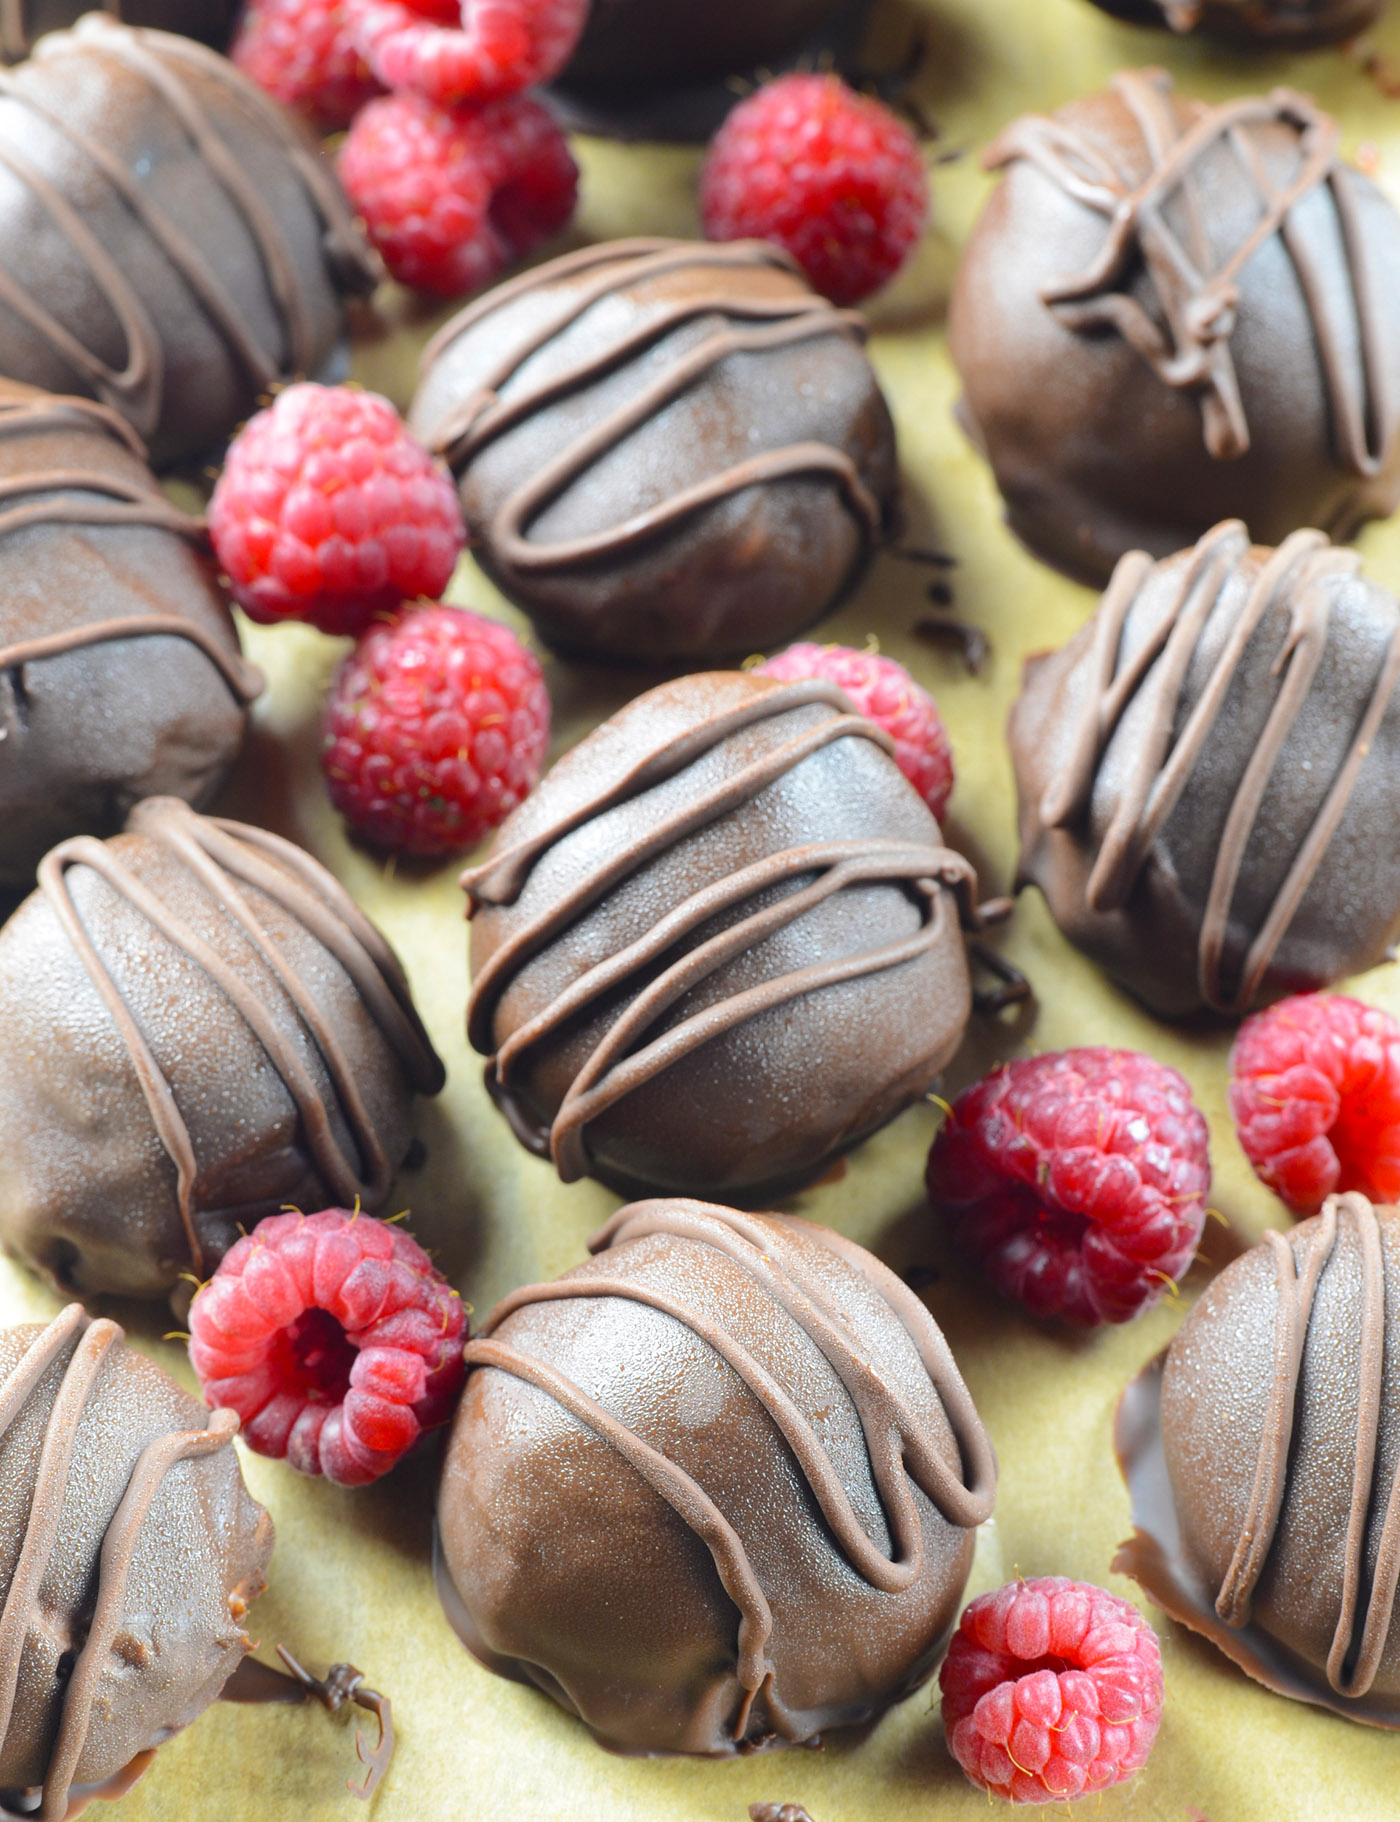 Assorted chocolate truffles with elegant chocolate drizzle, paired with vibrant fresh raspberries on a parchment-covered surface.